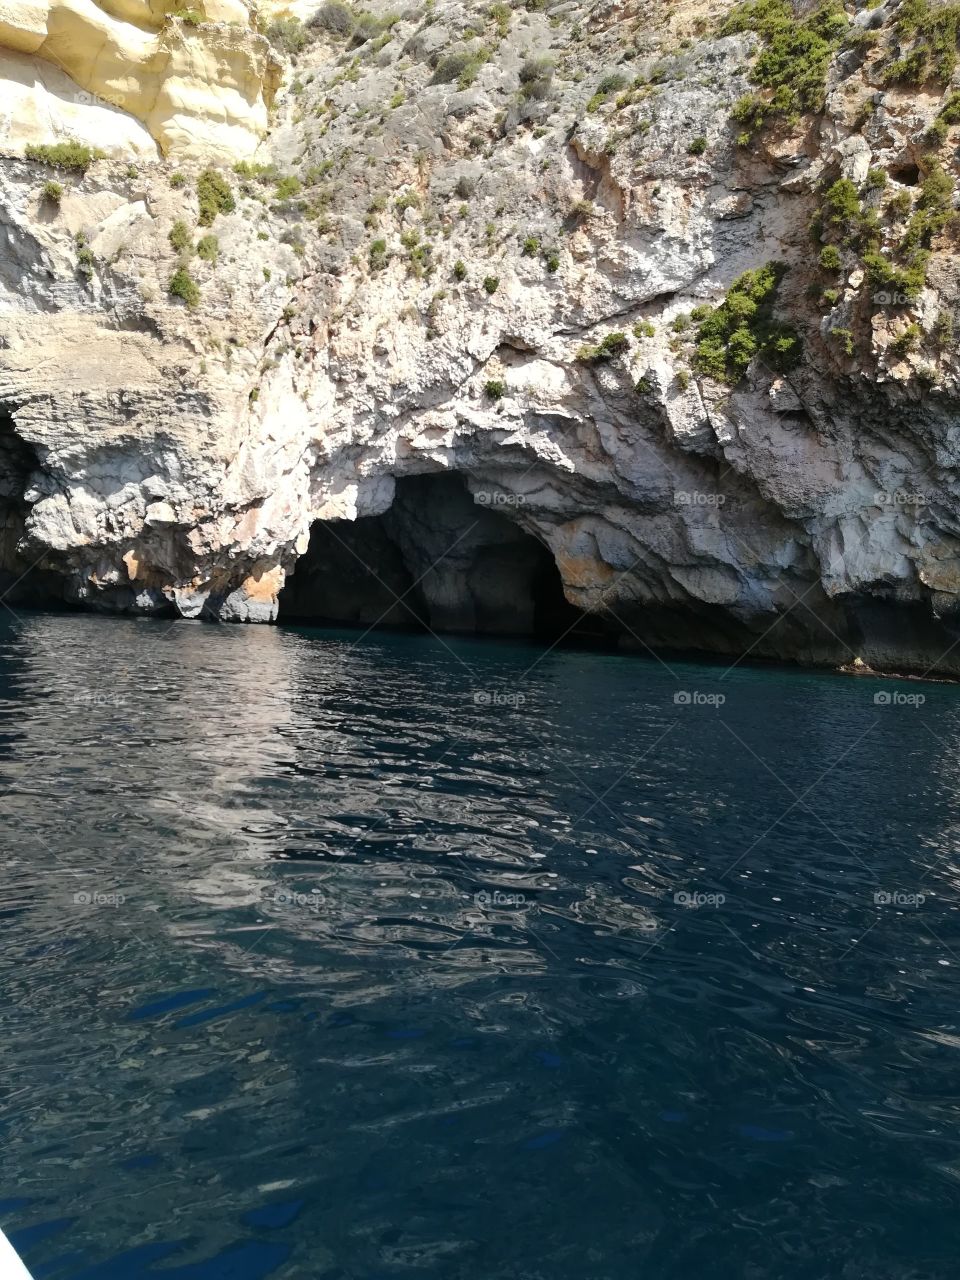 Blue Grotto Malta. Is the one of the most beautiful parts of the island the water is so clear and deep and the caves are out of this word.